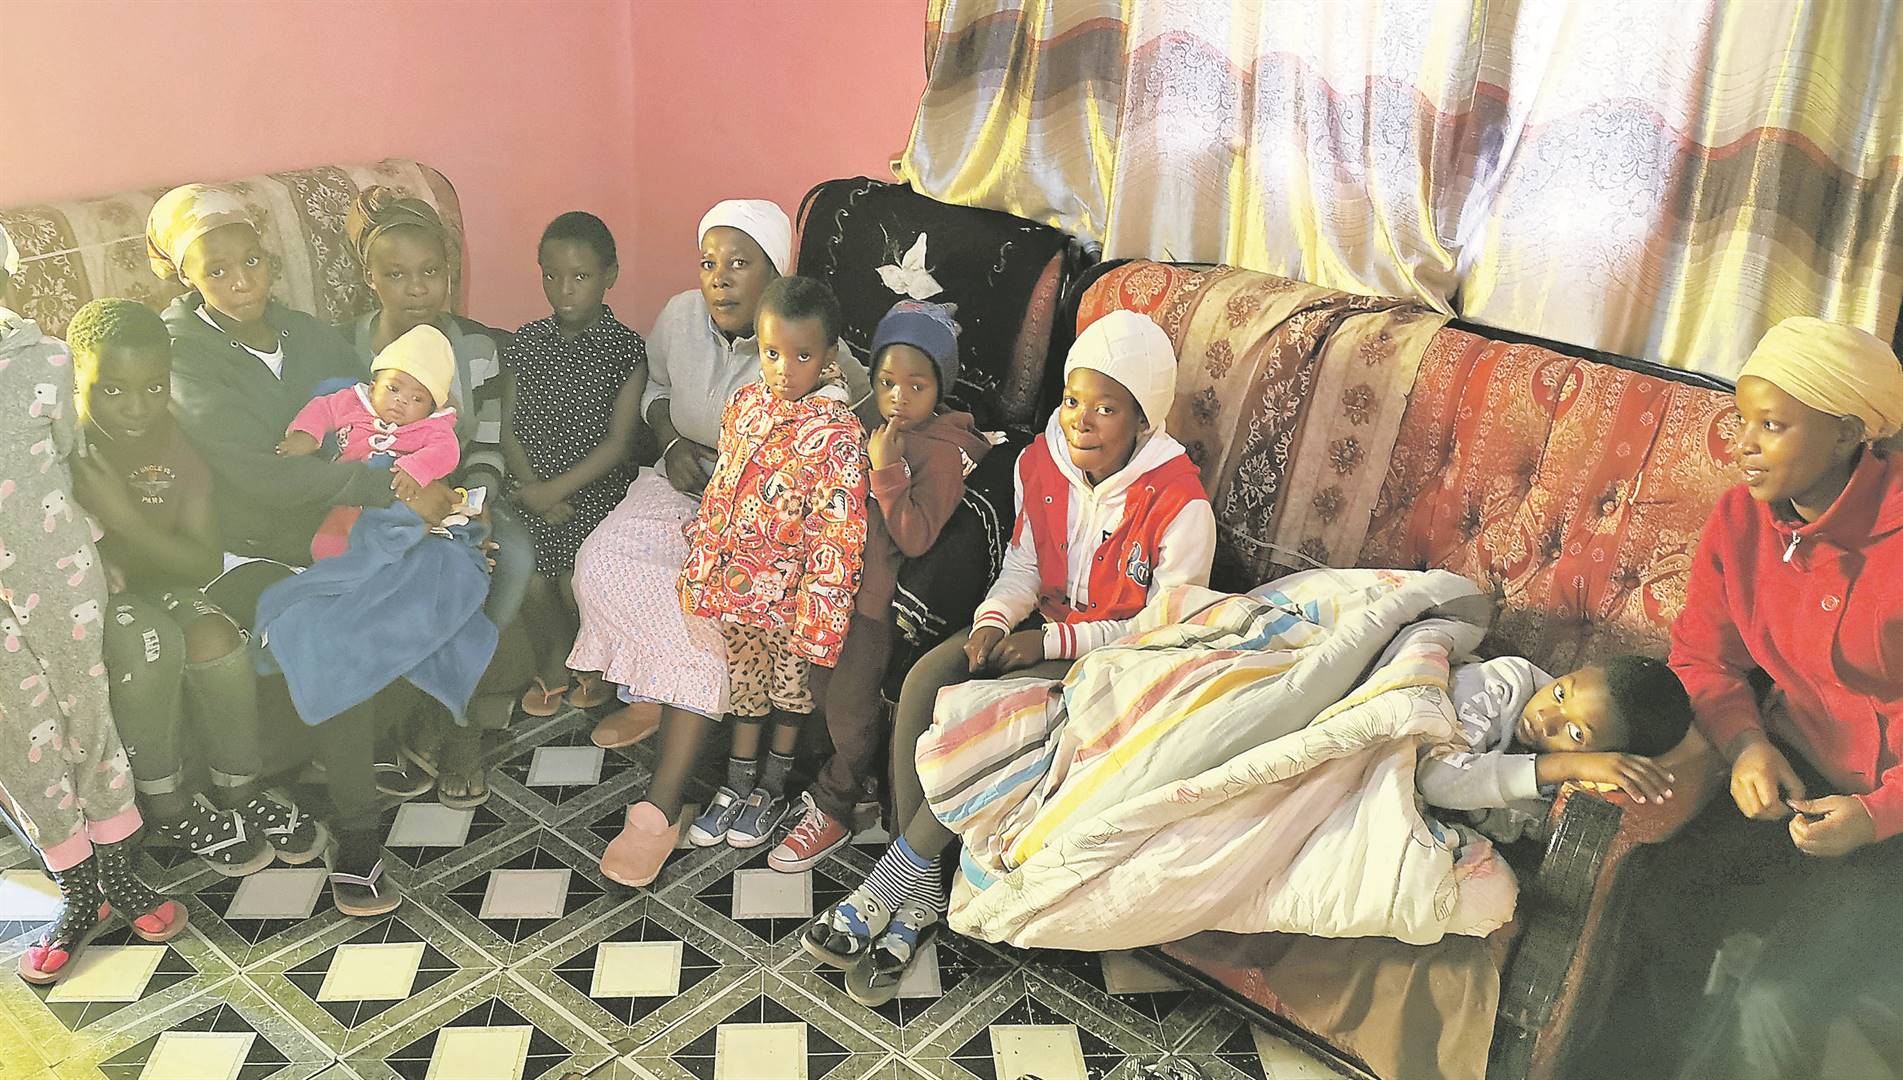 Nosapho Dukada with her children and grandchildren at their home in Newrest in Qokolweni village near Mthatha PHOTO: Lubabalo Ngcukana